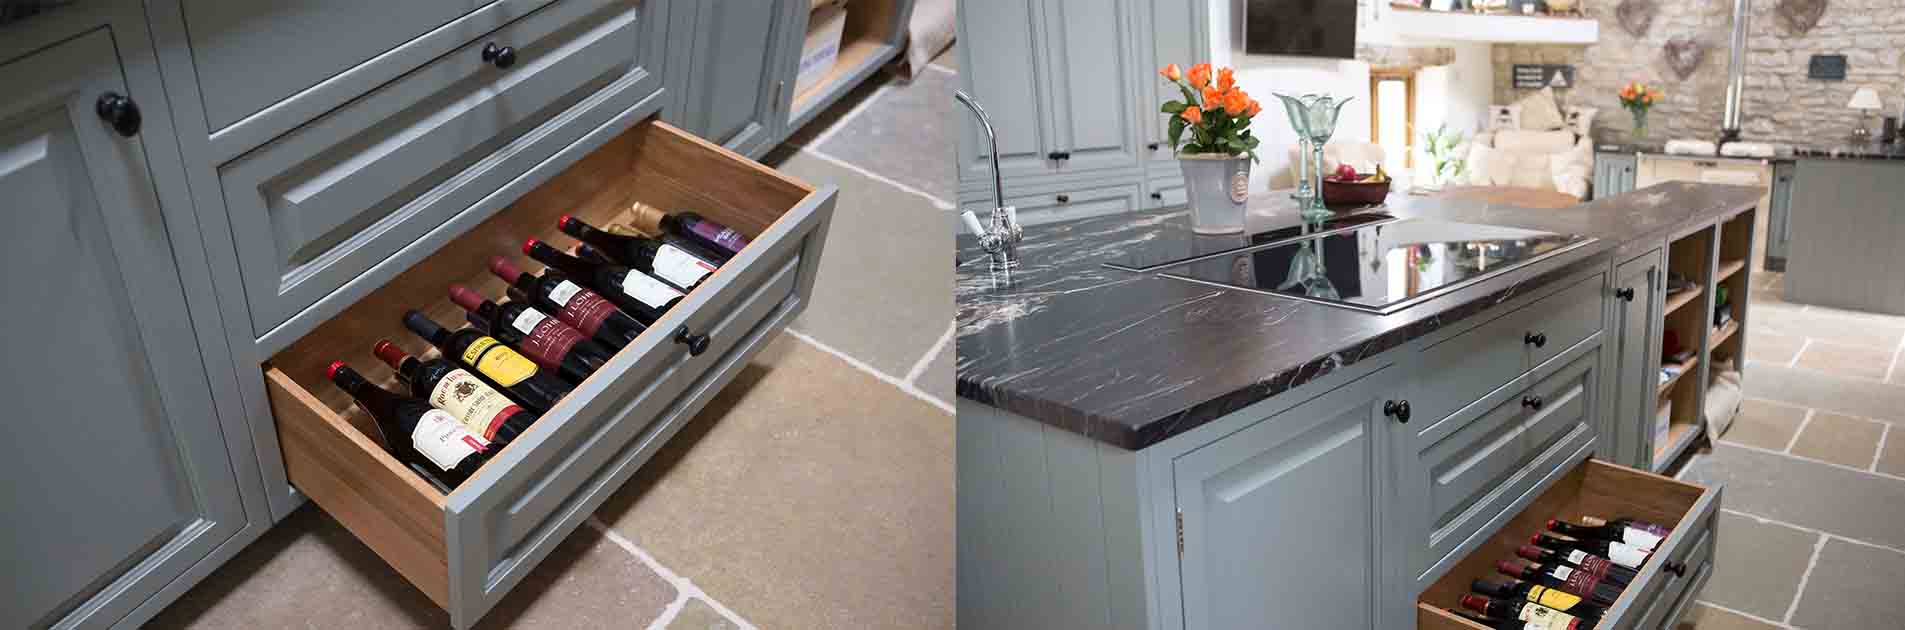 Kitchen Case Study: Prentice Windsor kitchen drawer cabinetry essential for red wine 